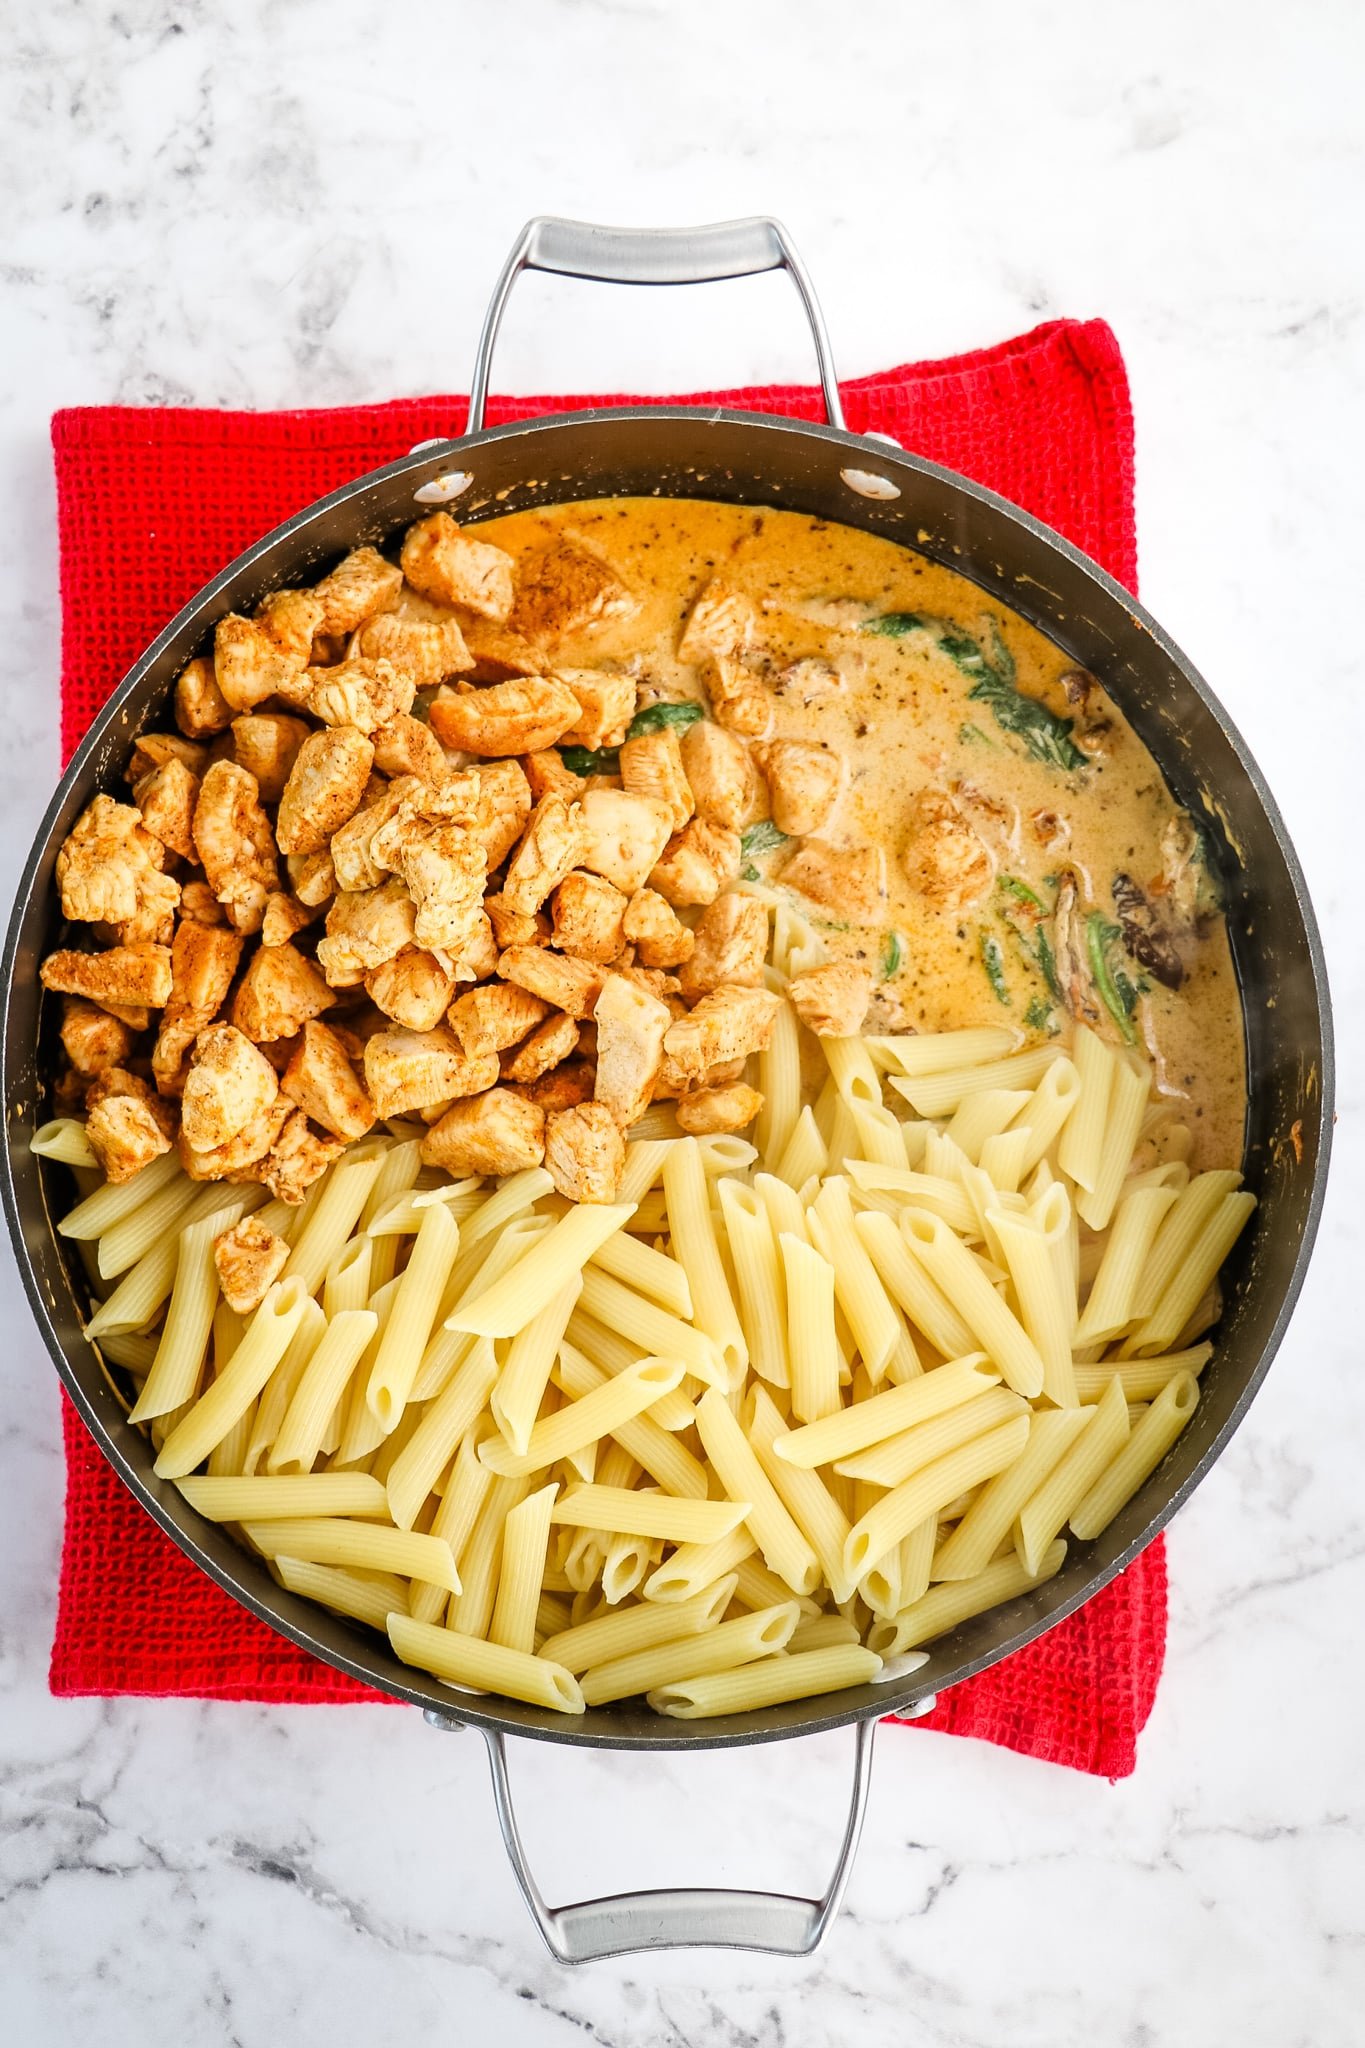 Creamy tuscan chicken sauce with pasta and diced chicken in skillet.